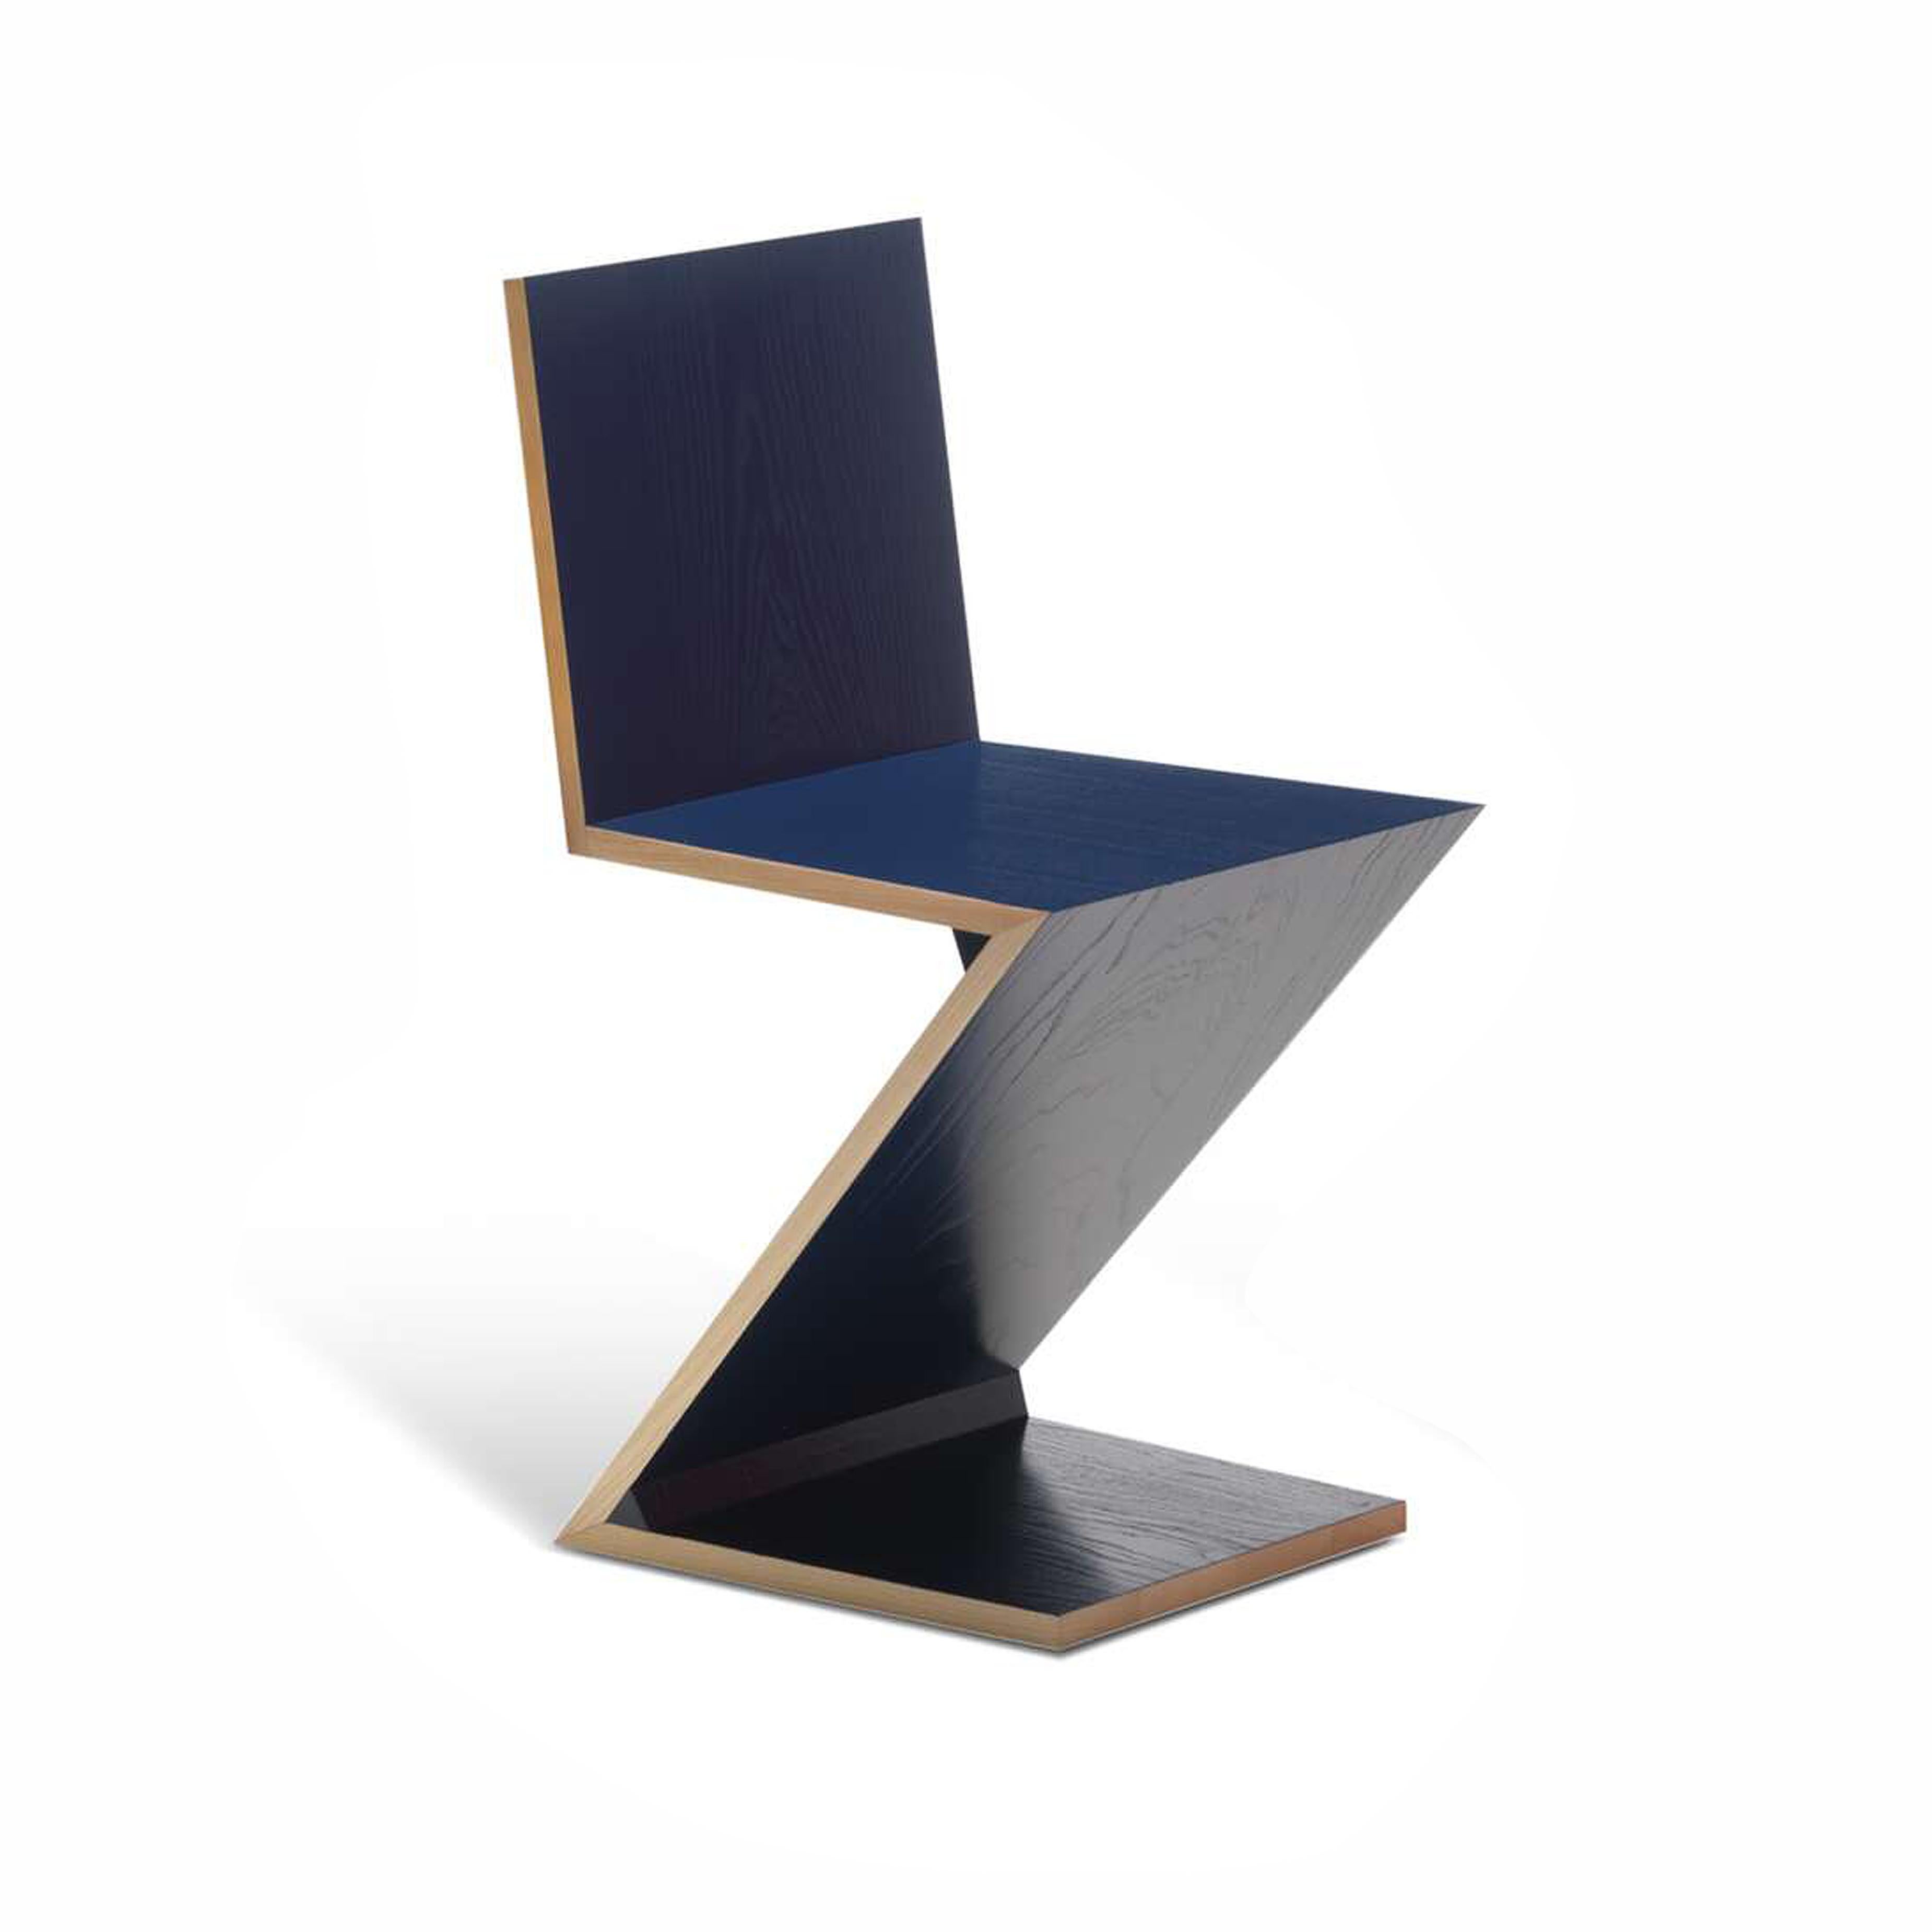 Chairs designed by Gerrit Thomas Rietveld in 1934. Relaunched in 1973/ 2011.
Manufactured by Cassina in Italy.

Designed by Gerrit Rietveld, this chair provided an early example of a cantilevered seat, and is composed of four wood boards